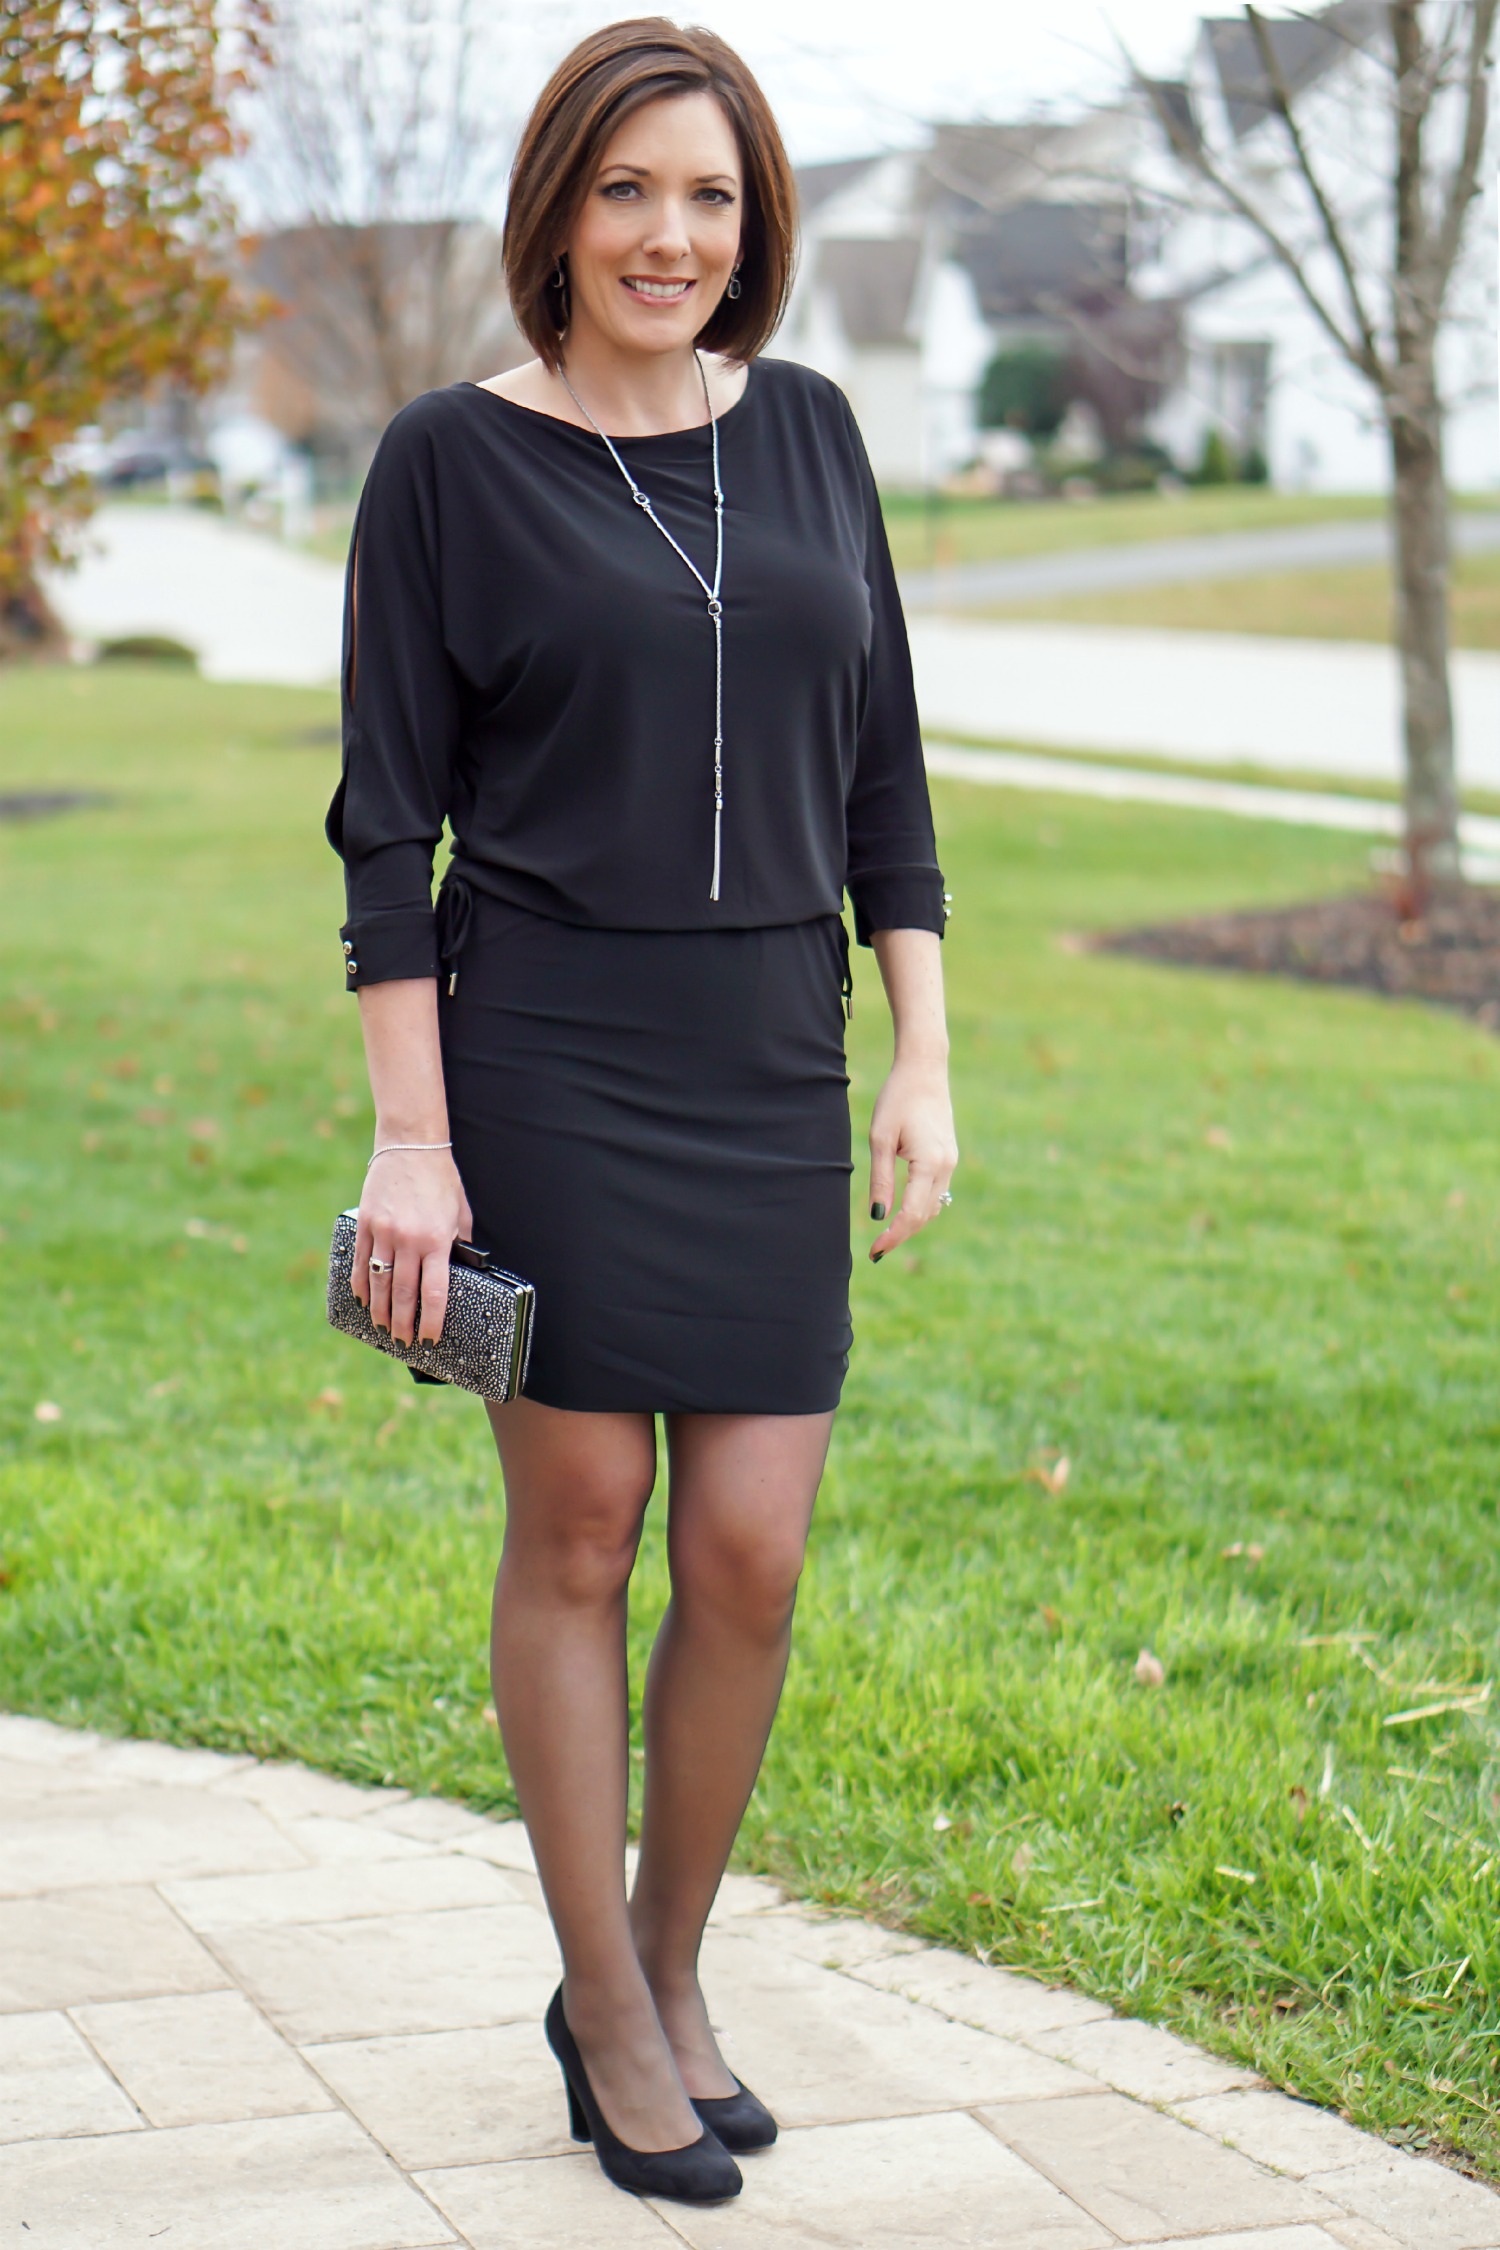 What to Wear to an Office Christmas Party: LBD with fun accessories, sheer black hose, and black suede pumps